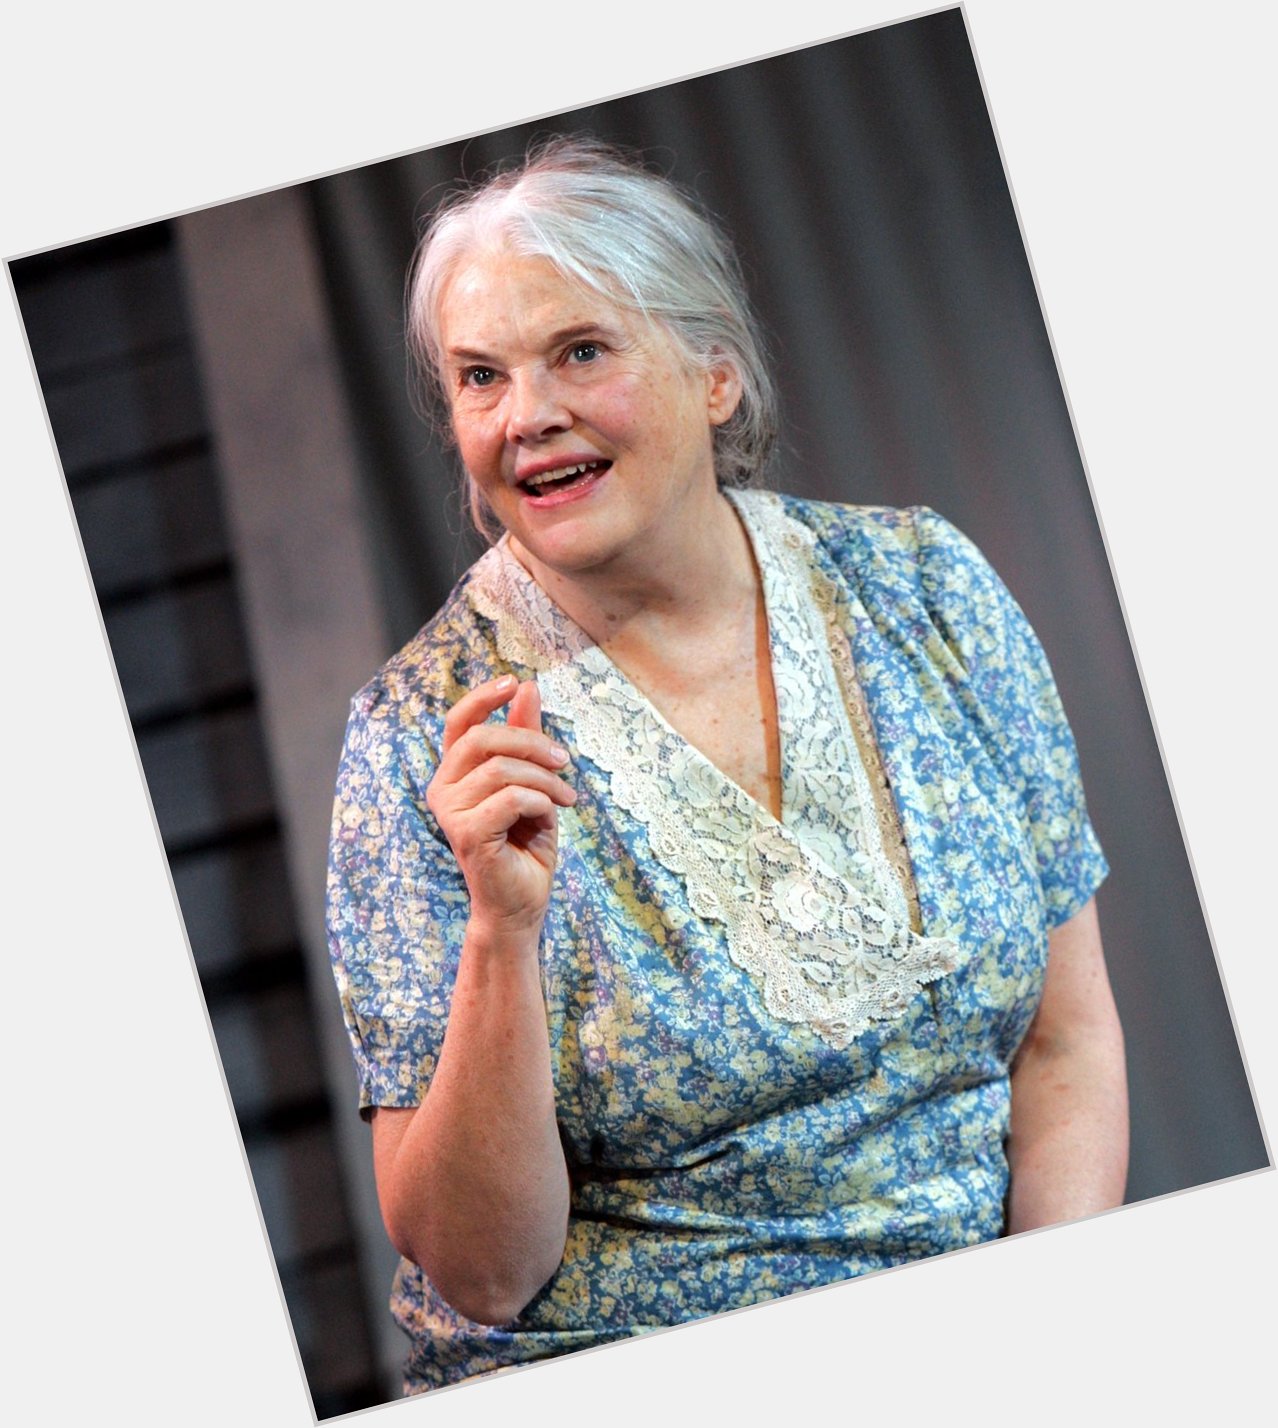 Happy birthday to the inimitable Lois Smith, who we\ve been lucky to have grace stages 5 times! 